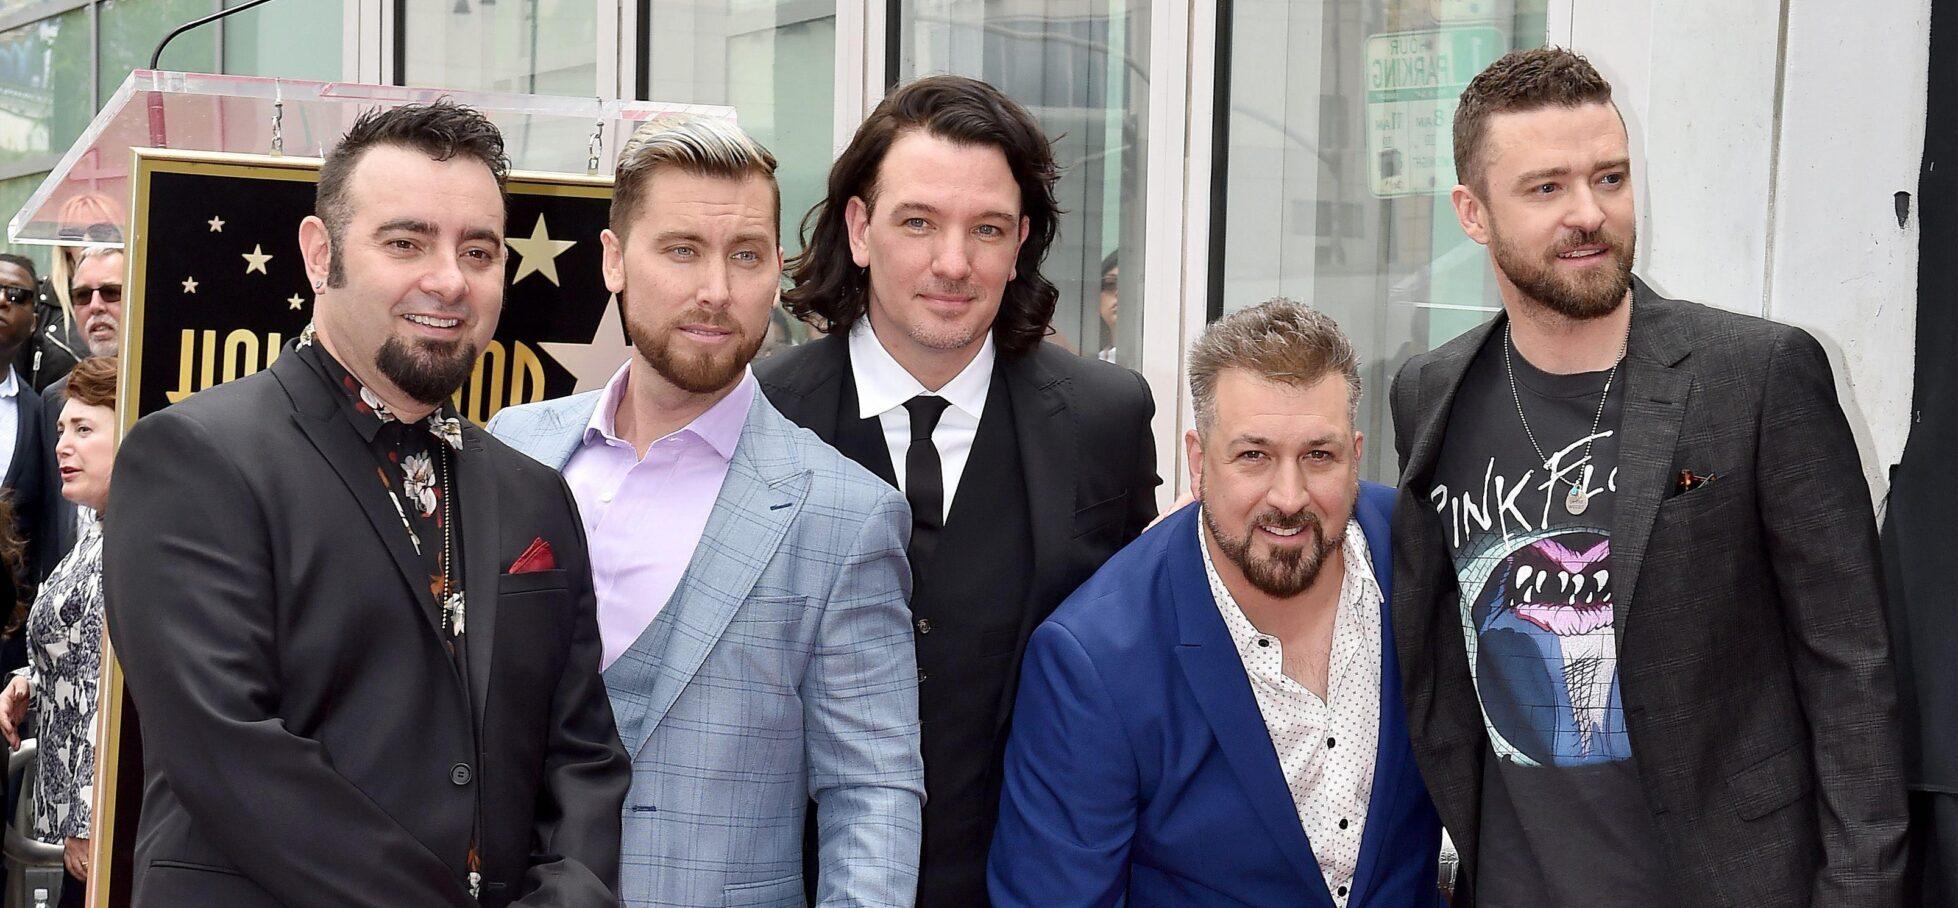 NSYNC honored with star on the Hollywood Walk of Fame. Hollywood, California. Pictured: Ellen DeGeneres. EVENT April 30, 2018. 30 Apr 2018 Pictured: NSYNC,Lance Bass,JC Chasez,Joey Fatone,Chris Kirkpatrick,Justin Timberlake. Photo credit: AXELLE/BAUER-GRIFFIN/MEGA TheMegaAgency.com +1 888 505 6342 (Mega Agency TagID: MEGA211762_004.jpg) [Photo via Mega Agency]